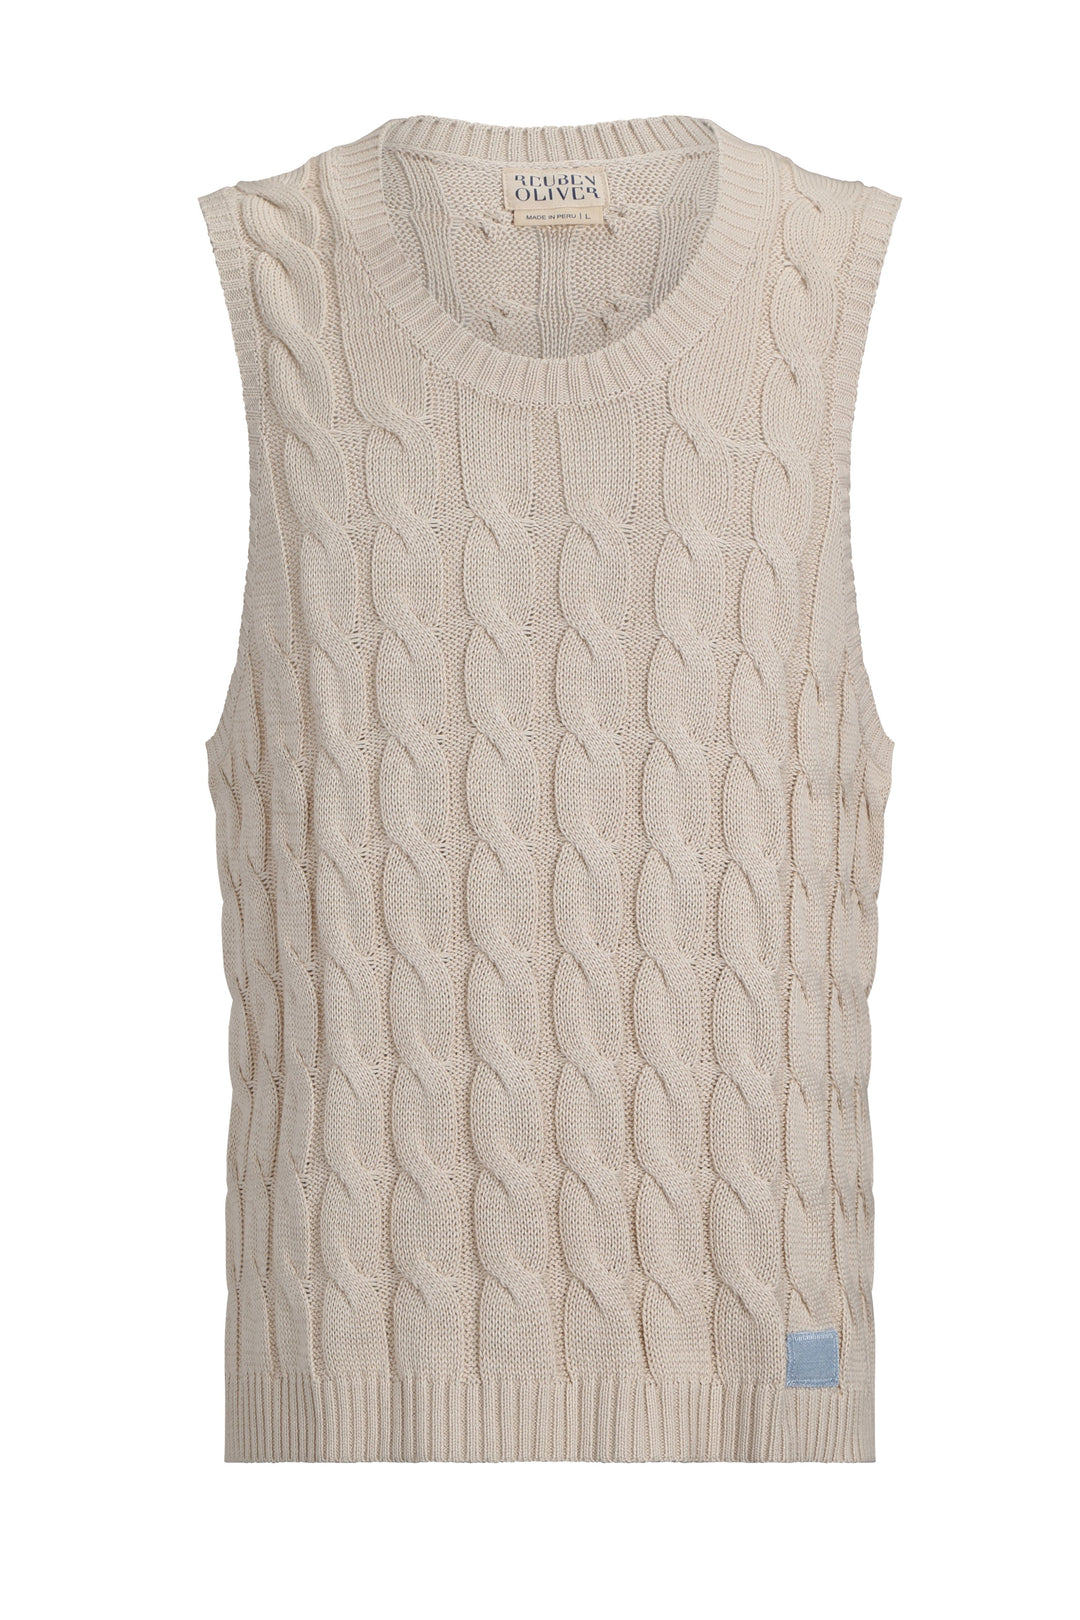 The Cable Knit Tank Top